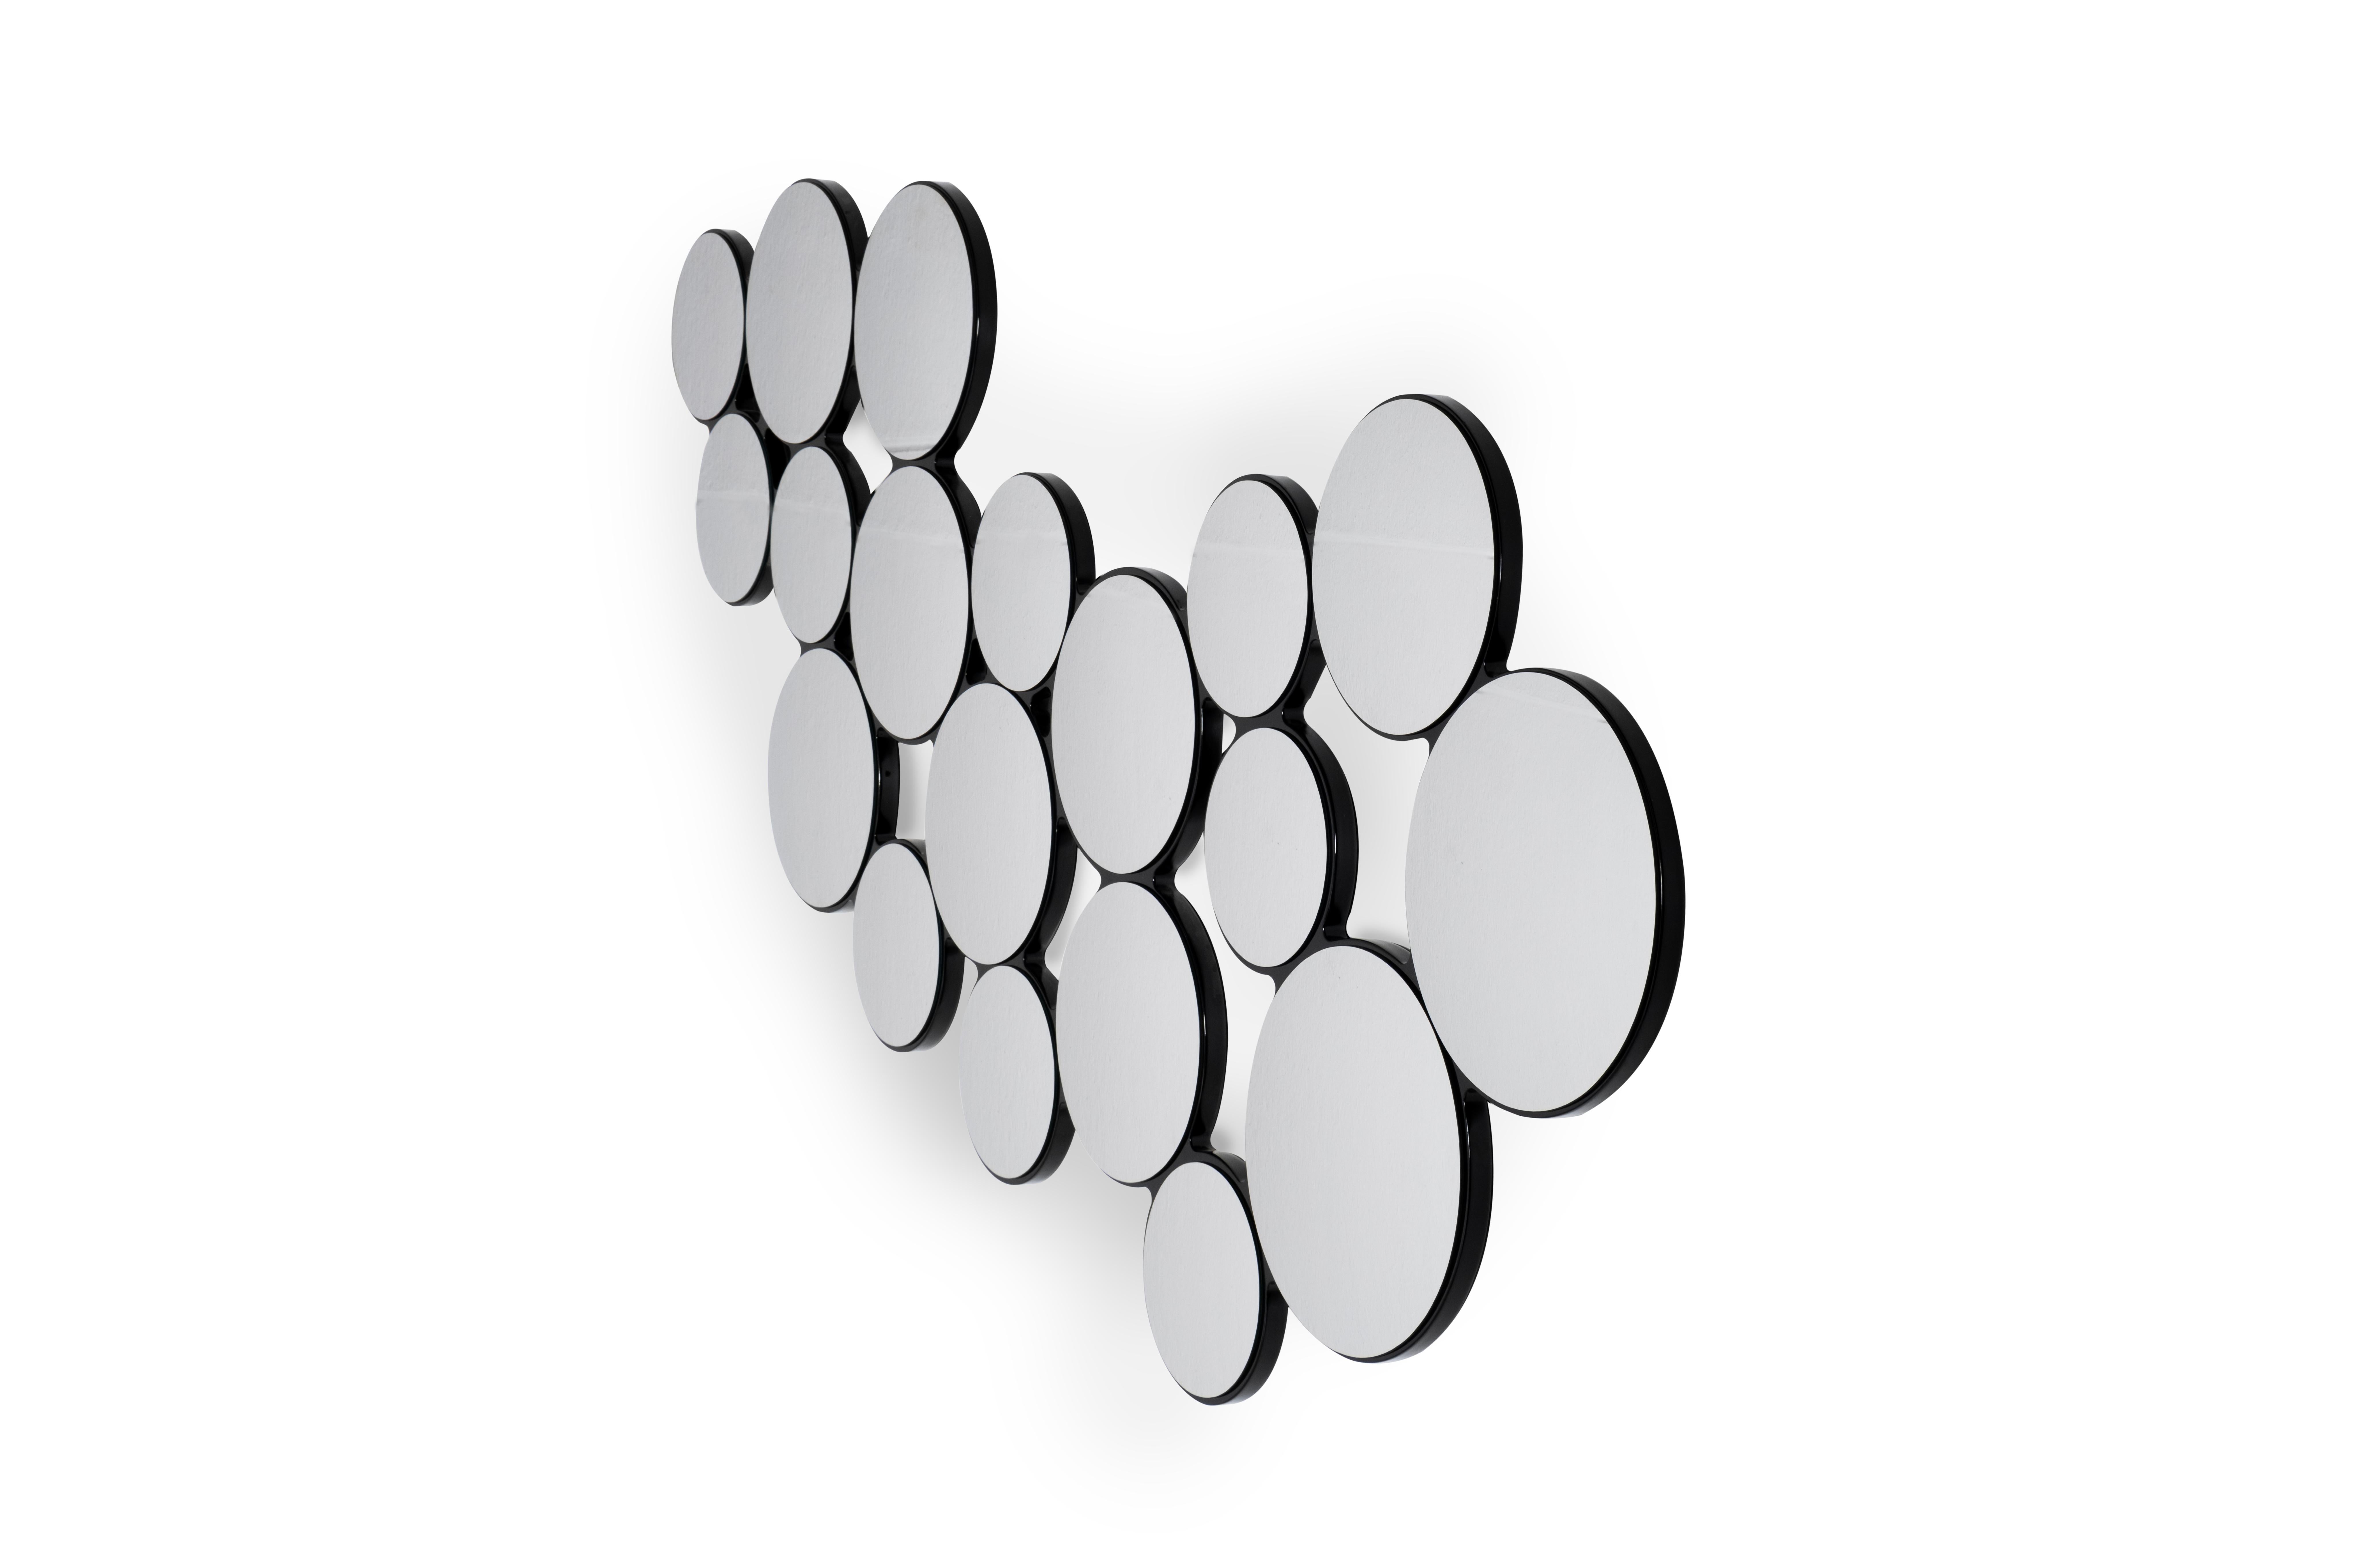 Modern Bubbles 19 Wall Mirror, Contemporary Collection, Handcrafted in Portugal - Europe by Greenapple.

A stunning decorative wall mirror with wood base, lacquered in high gloss black combined with 19 round convex clear mirrors. It feels like